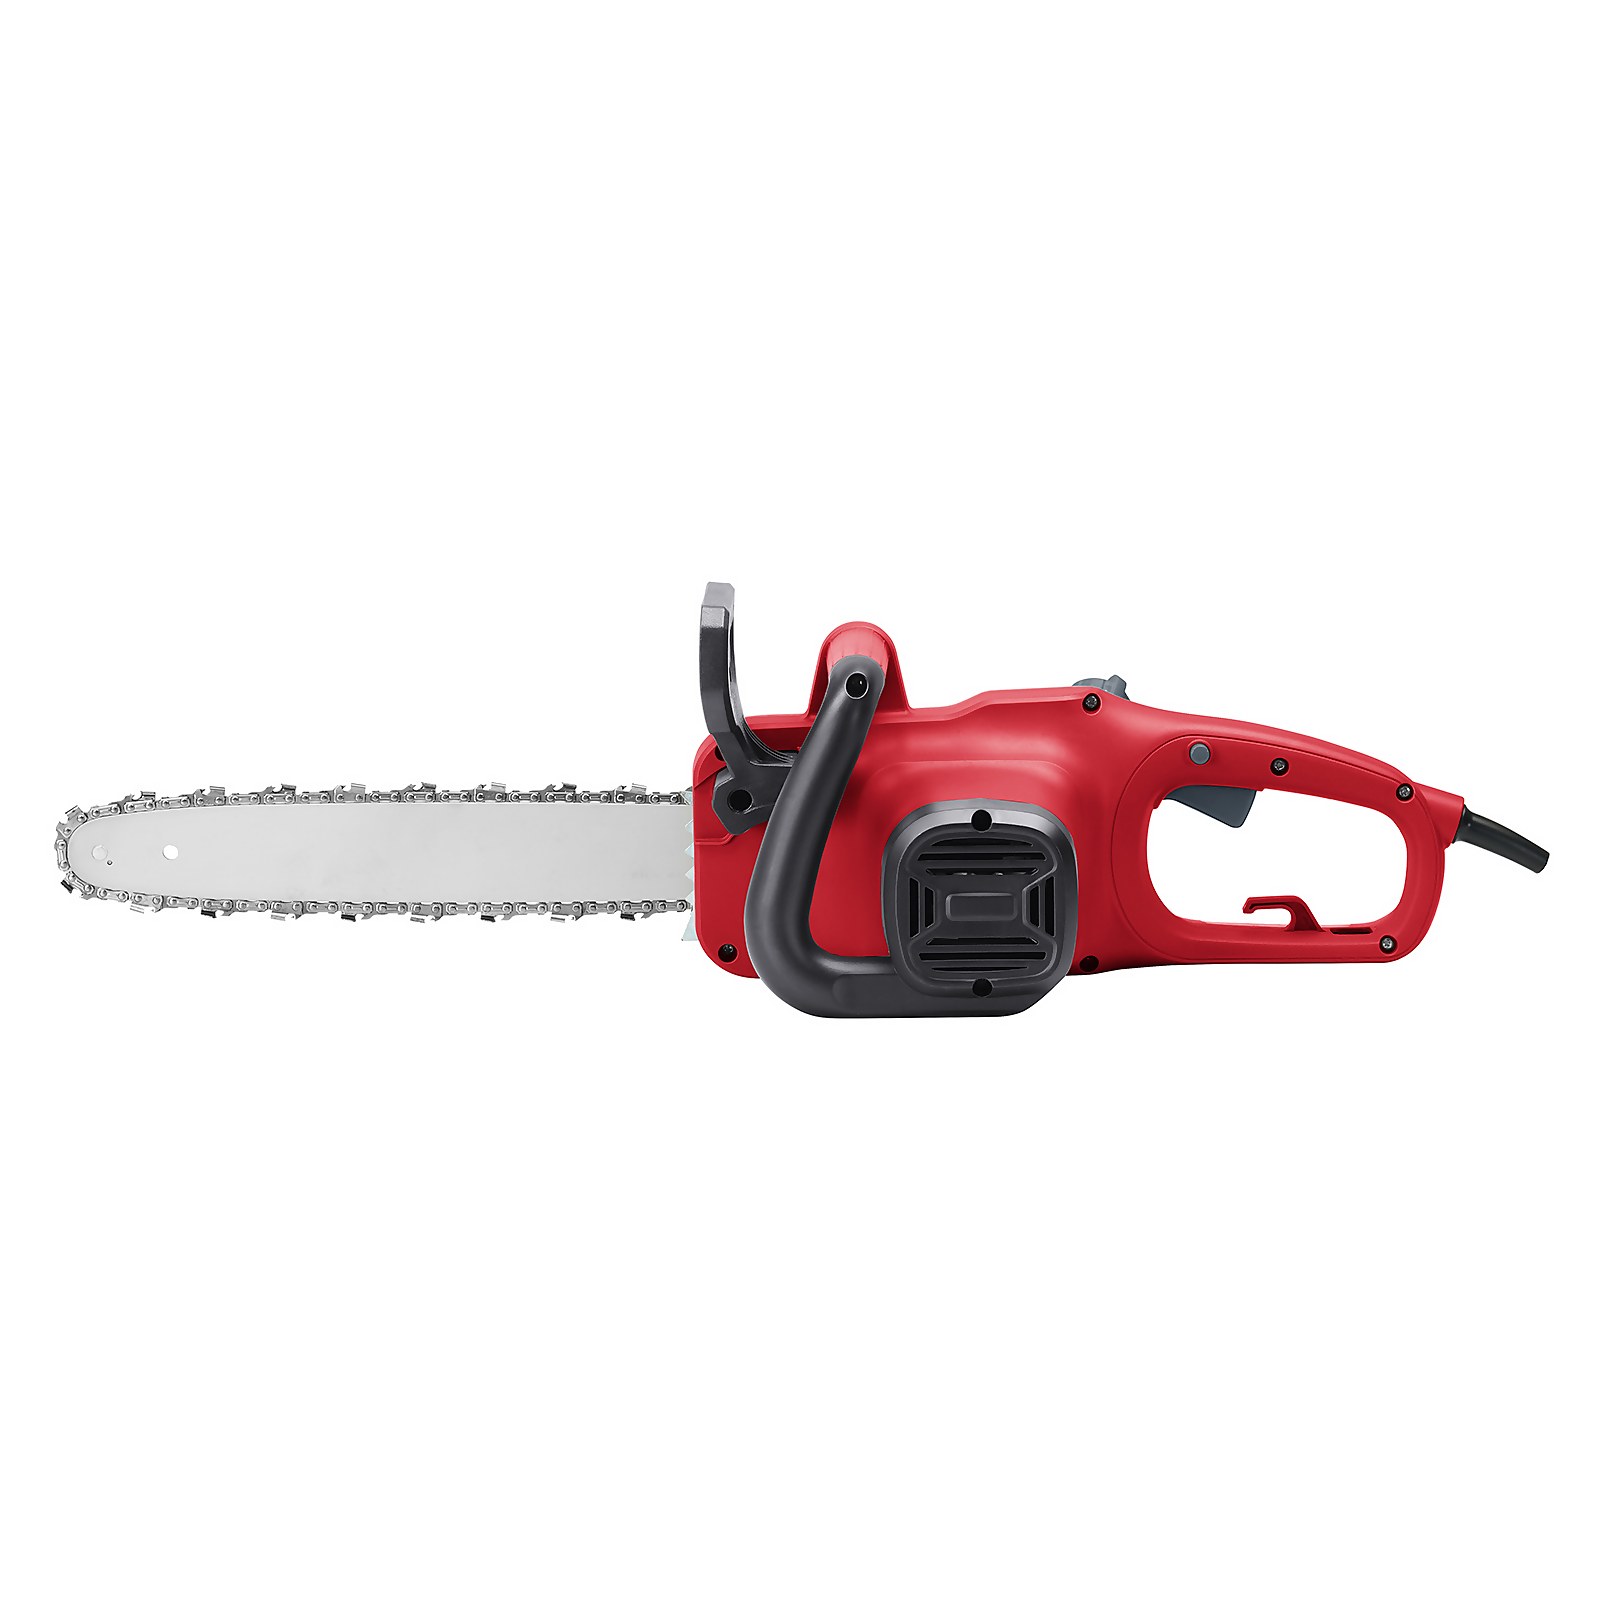 Sovereign 1800w Electric Chainsaw